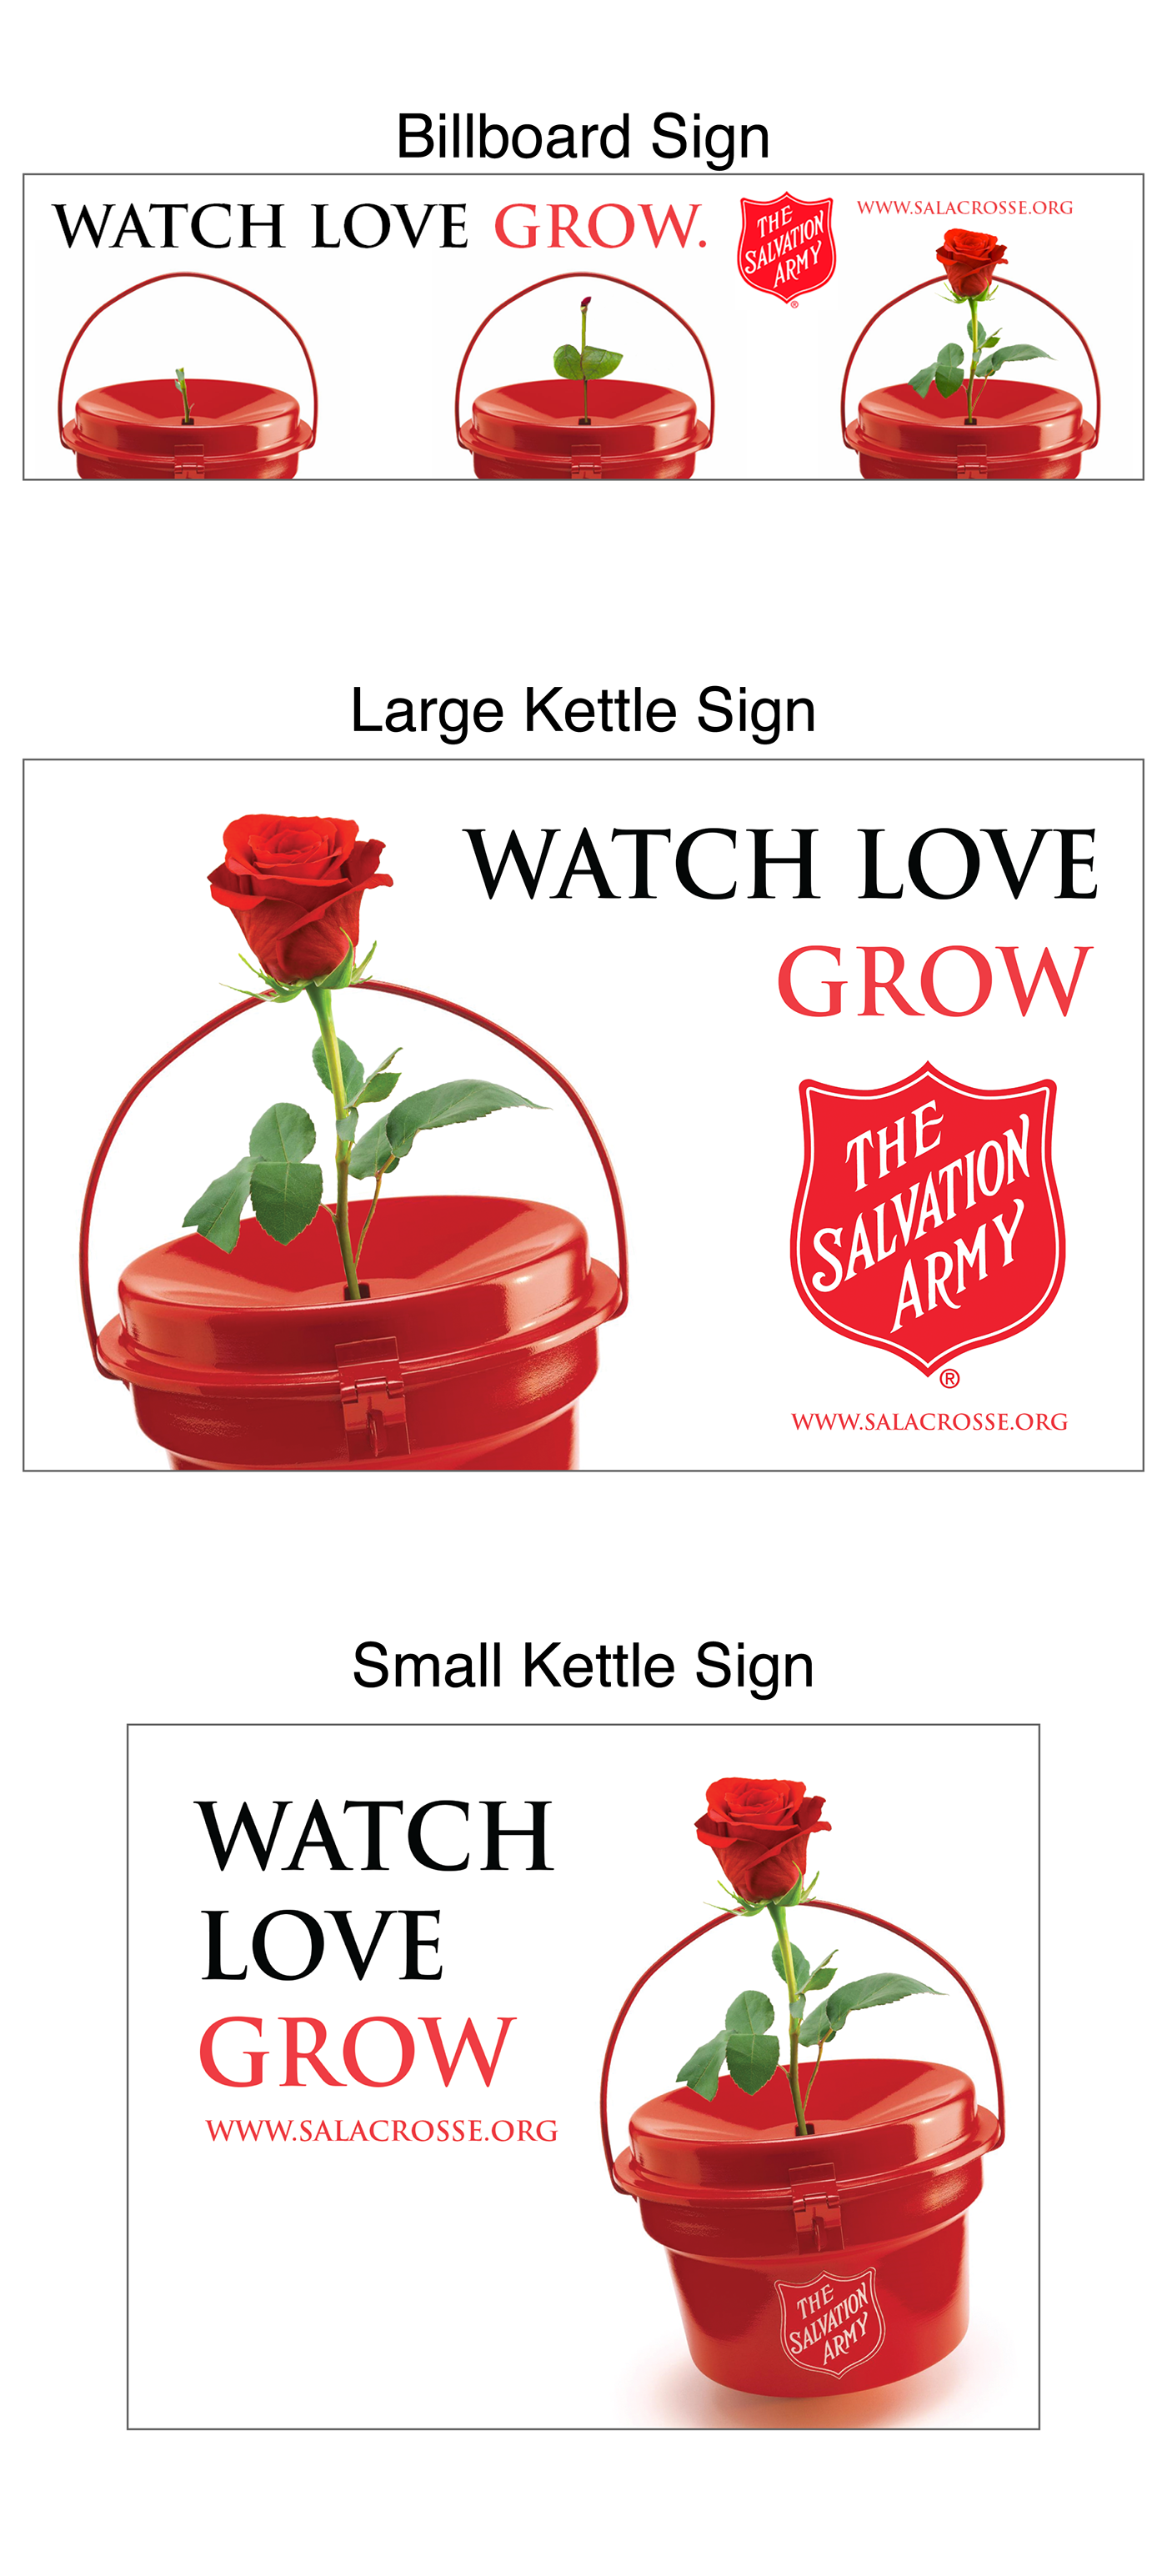 Salvation Army red kettle